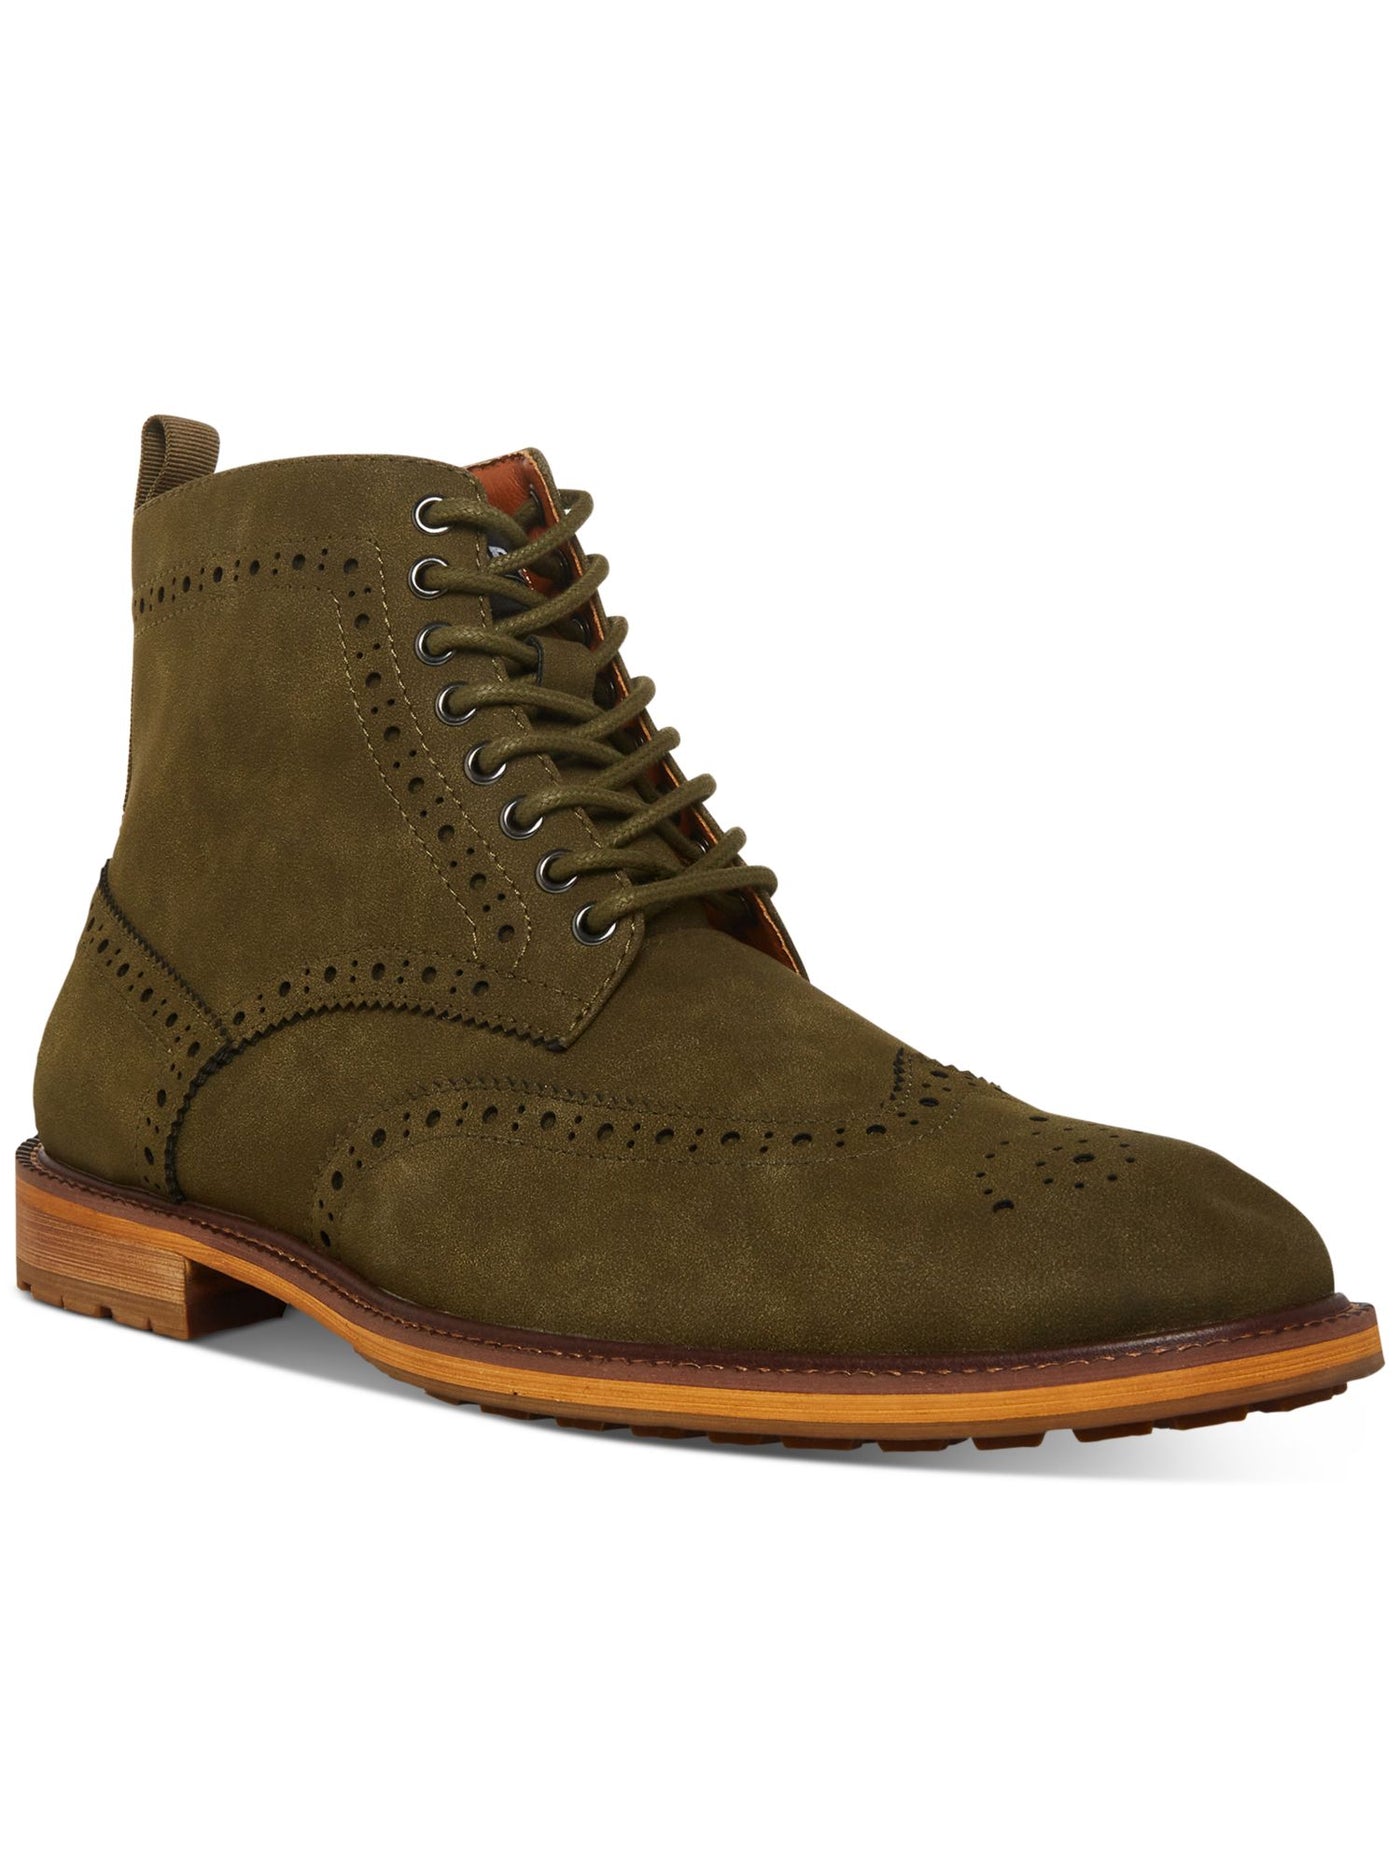 MADDEN Mens Olive Green Brogue Detailing Lace-Up Front Heel Pull-Tab Padded Remppr Wingtip Toe Block Heel Zip-Up Boots Shoes 8.5